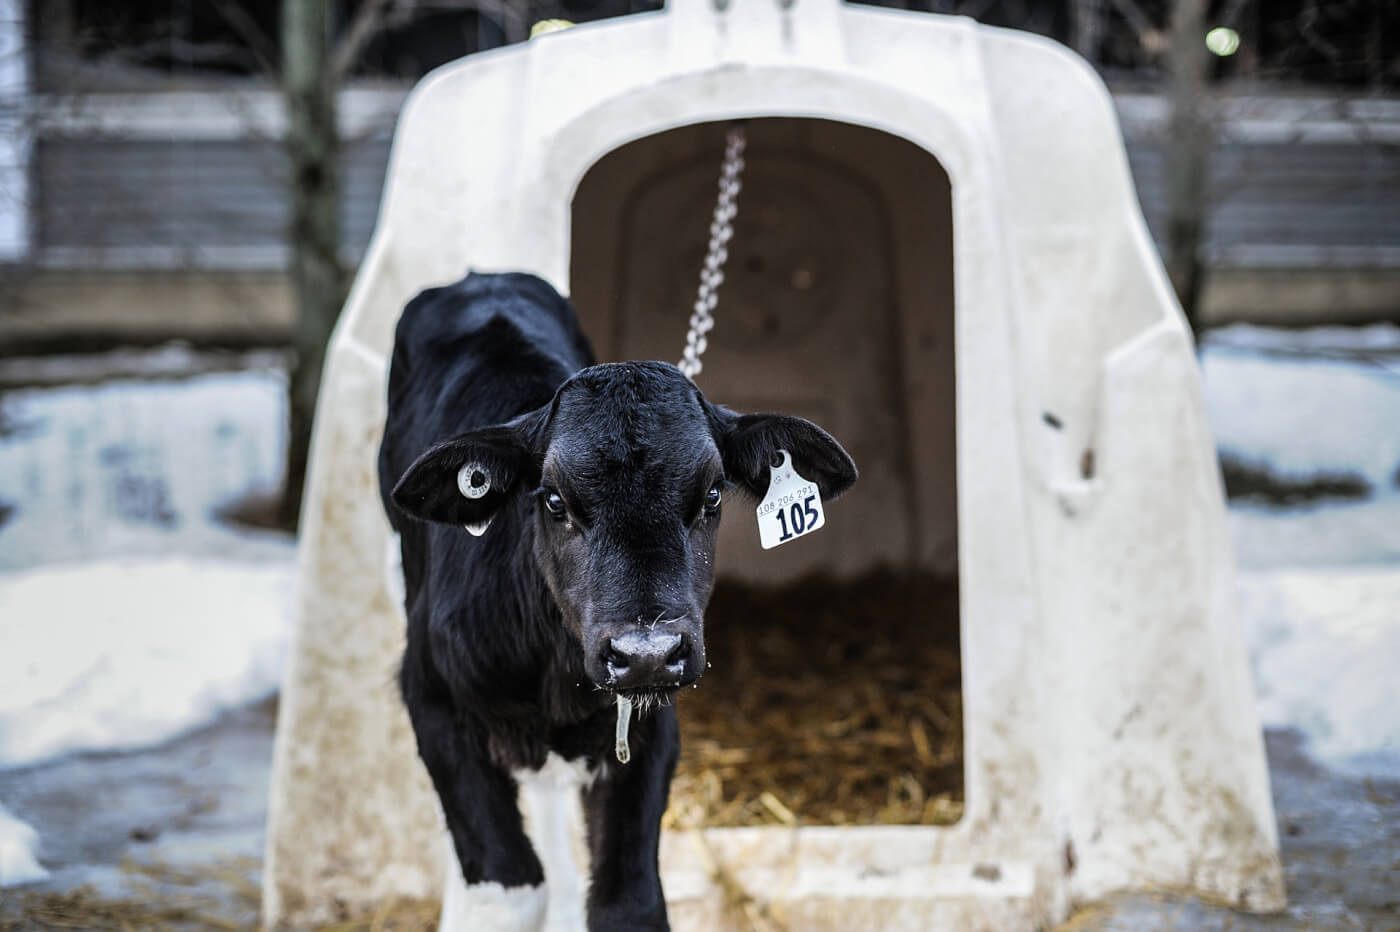 A calf chained to a veal crate throughout the cold winter.